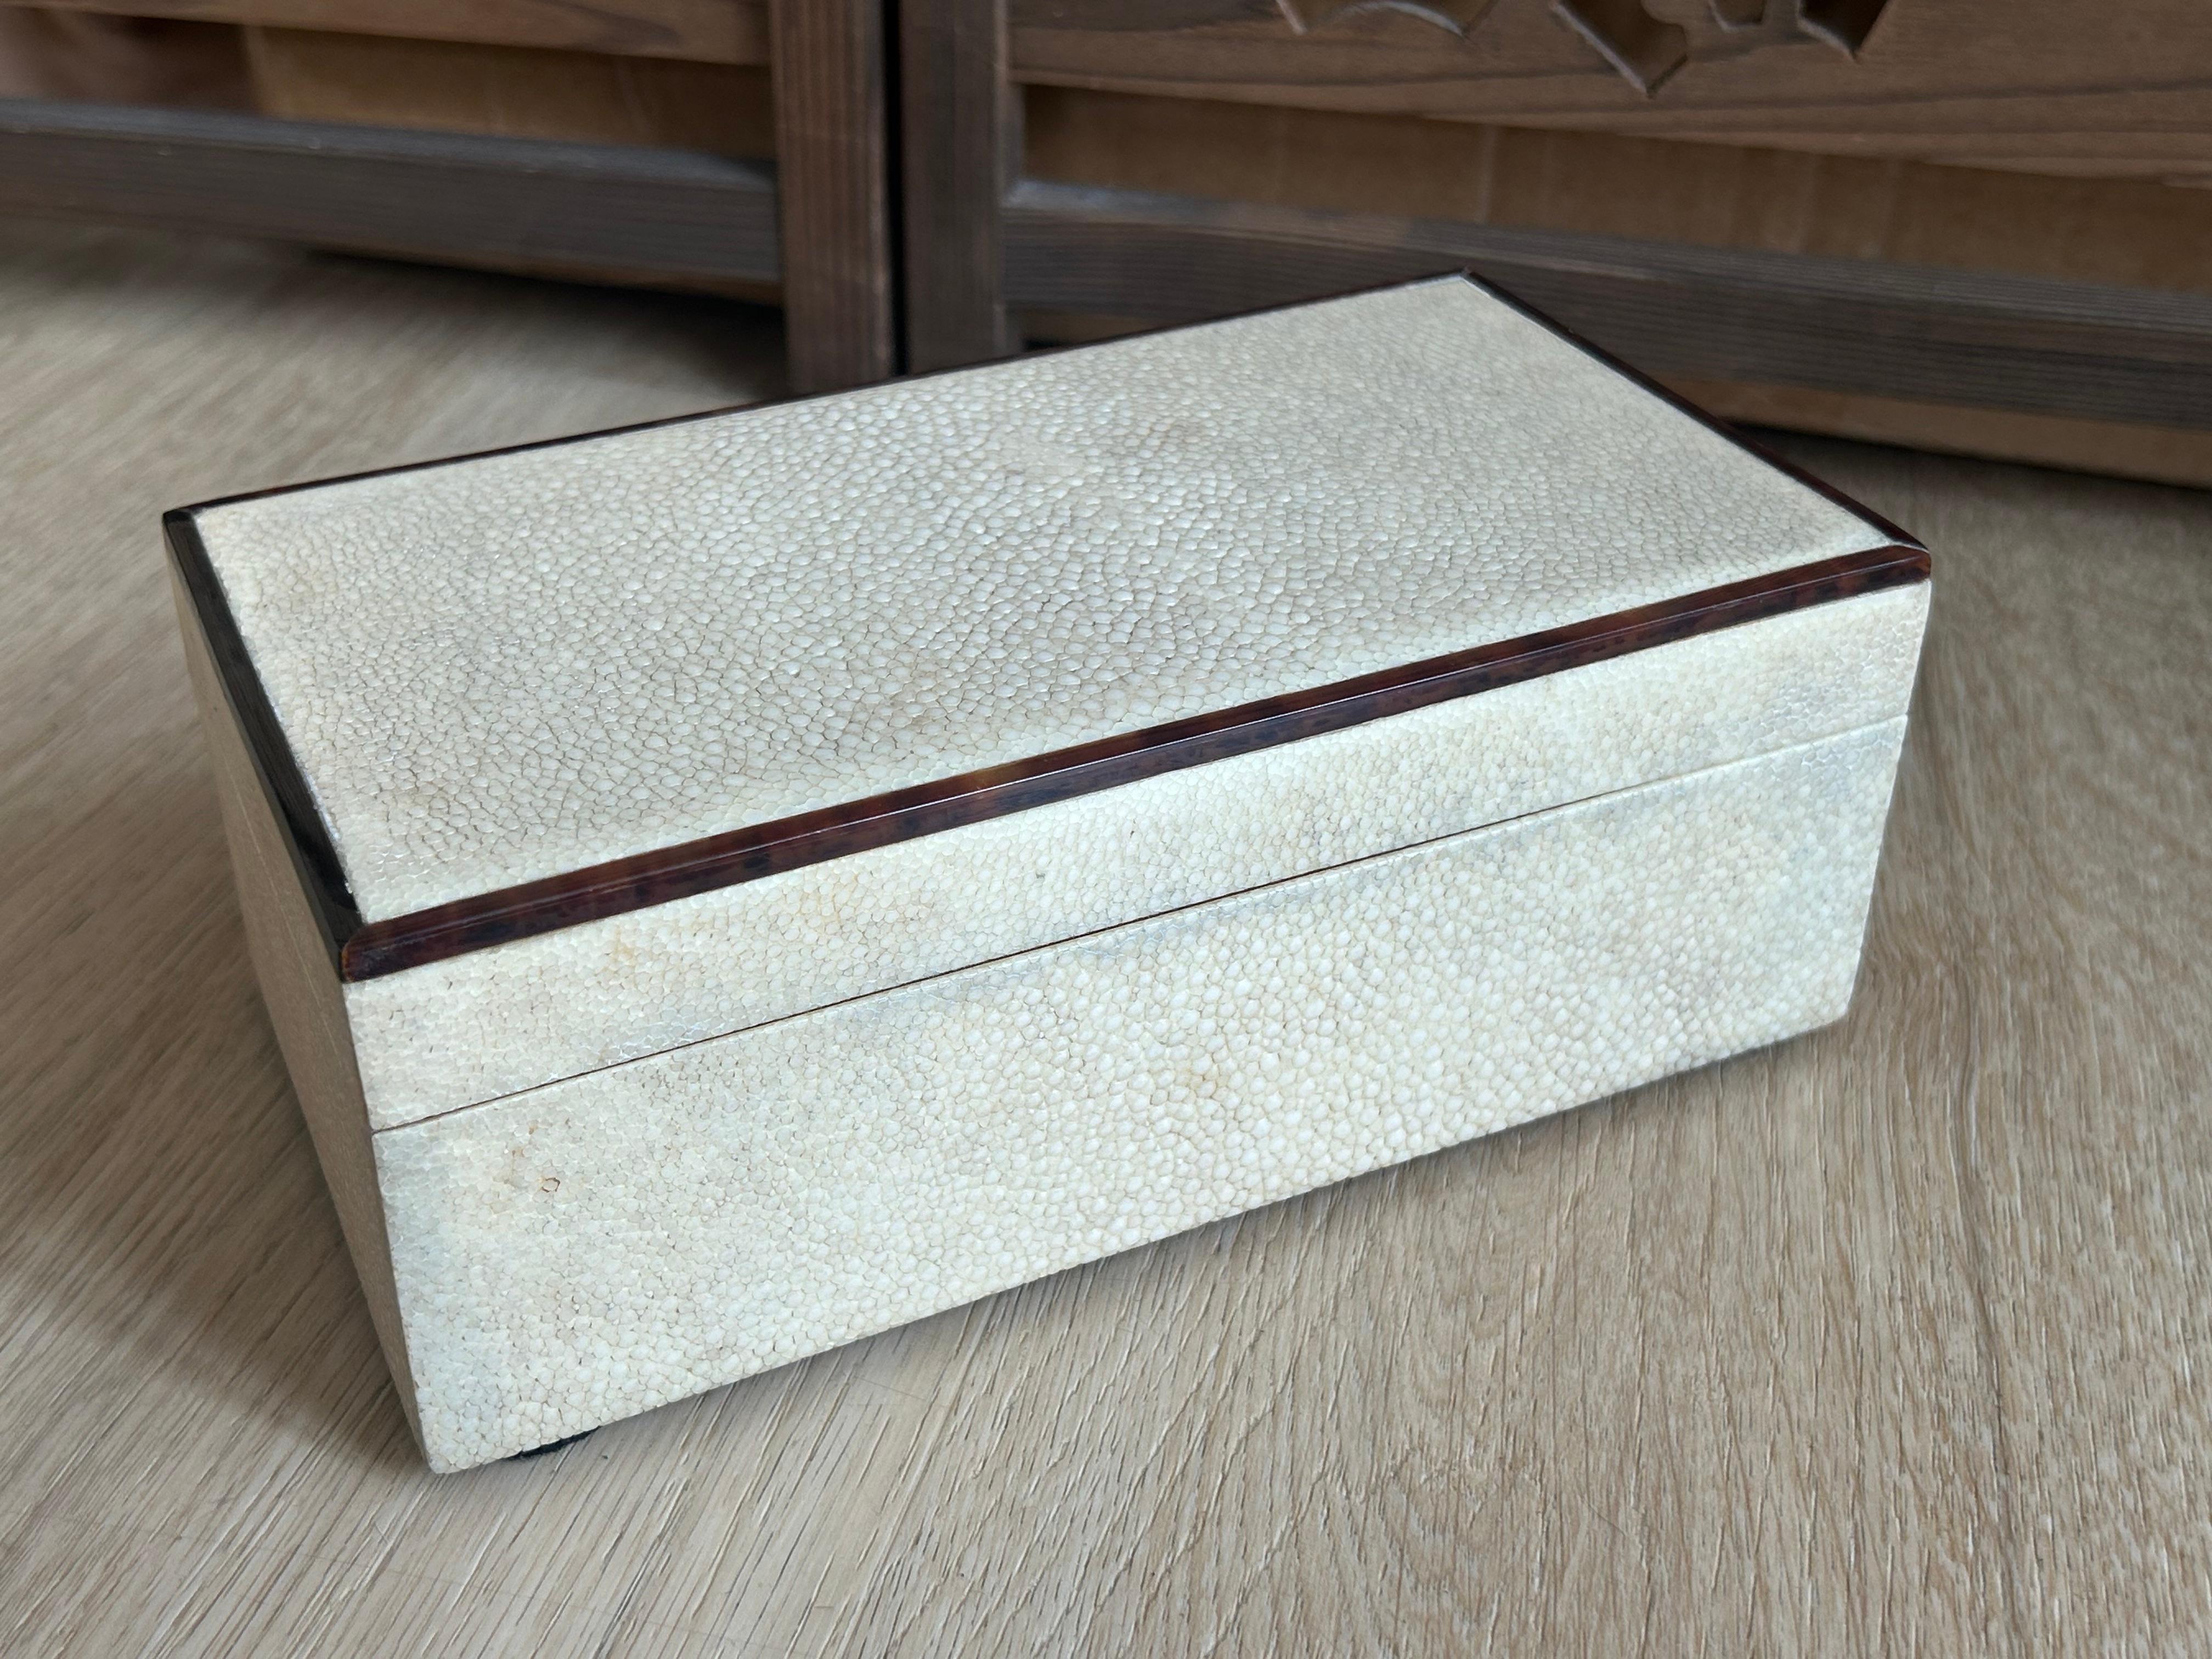 Cigar box lined in cedar wood with adjustable compartments. Rectangular in shape with an elegant design and a lid with tortoiseshell edges.

The pictures are part of the description.

Warning: Since this items are made of a protected species, CITES